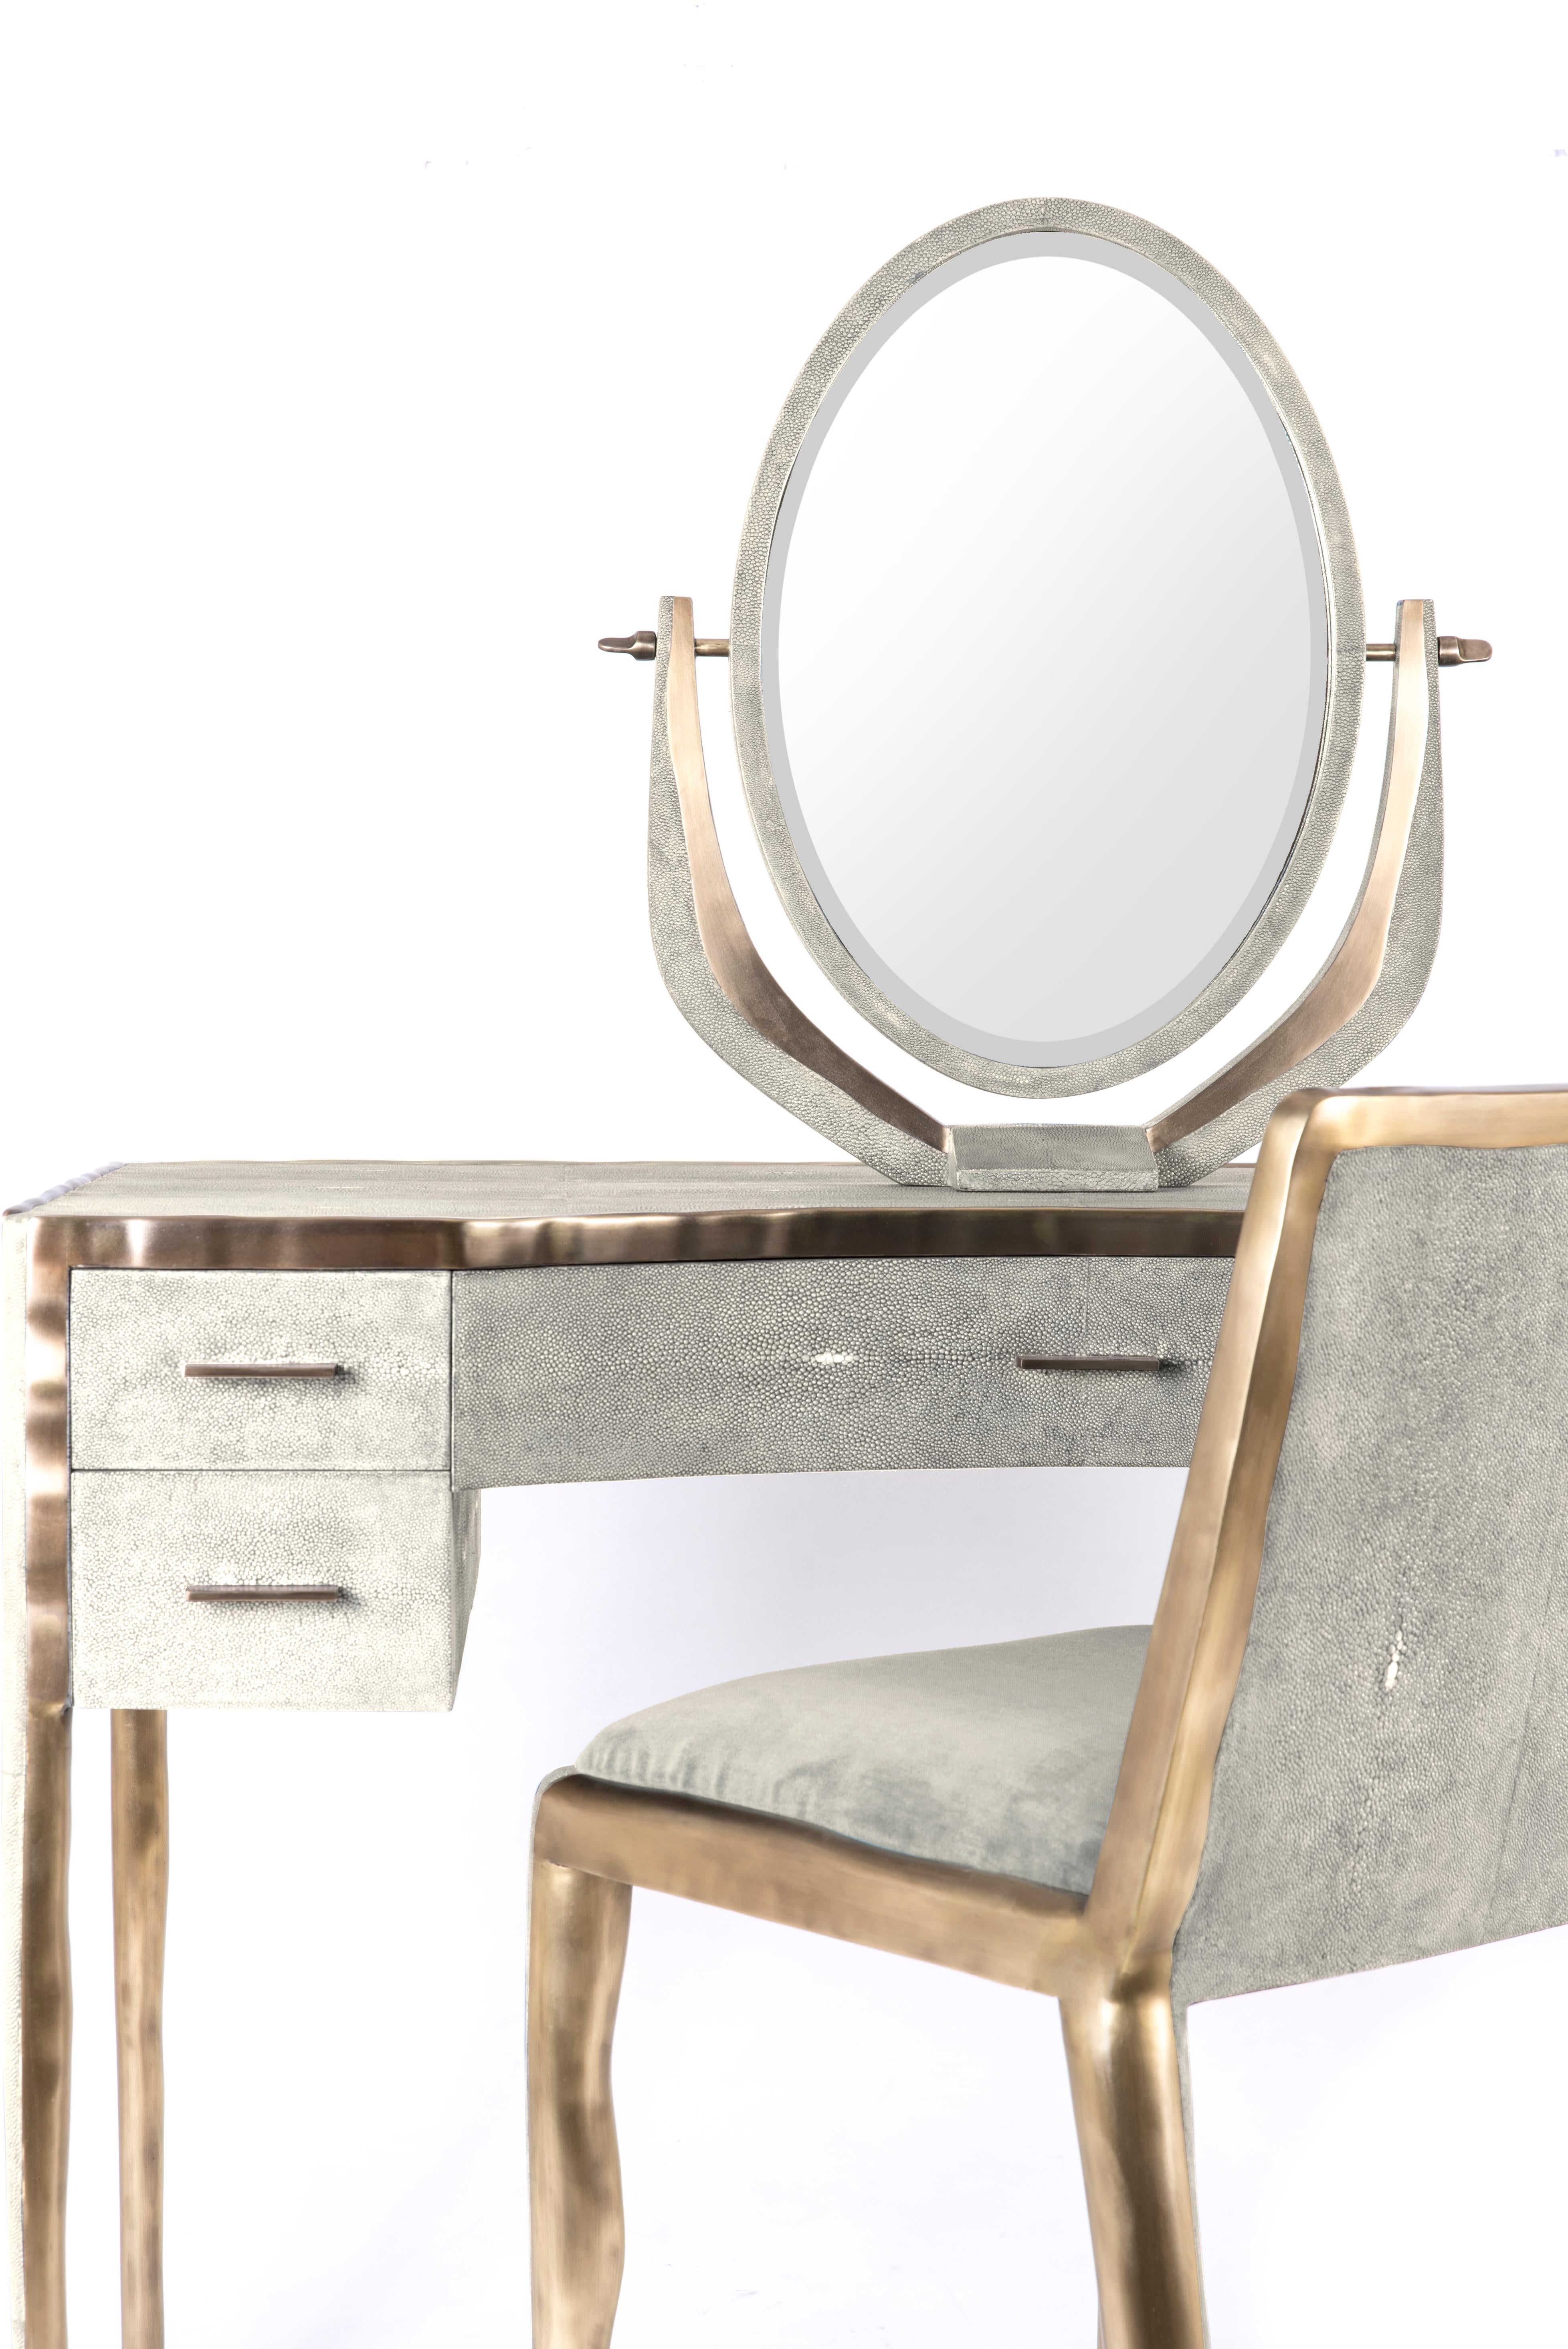 The melting vanity table's simple but elegant design, makes for an adaptable elegant piece of furniture. The cream shagreen inlaid surface is framed with an irregular surface bronze-patina brass that creates the 